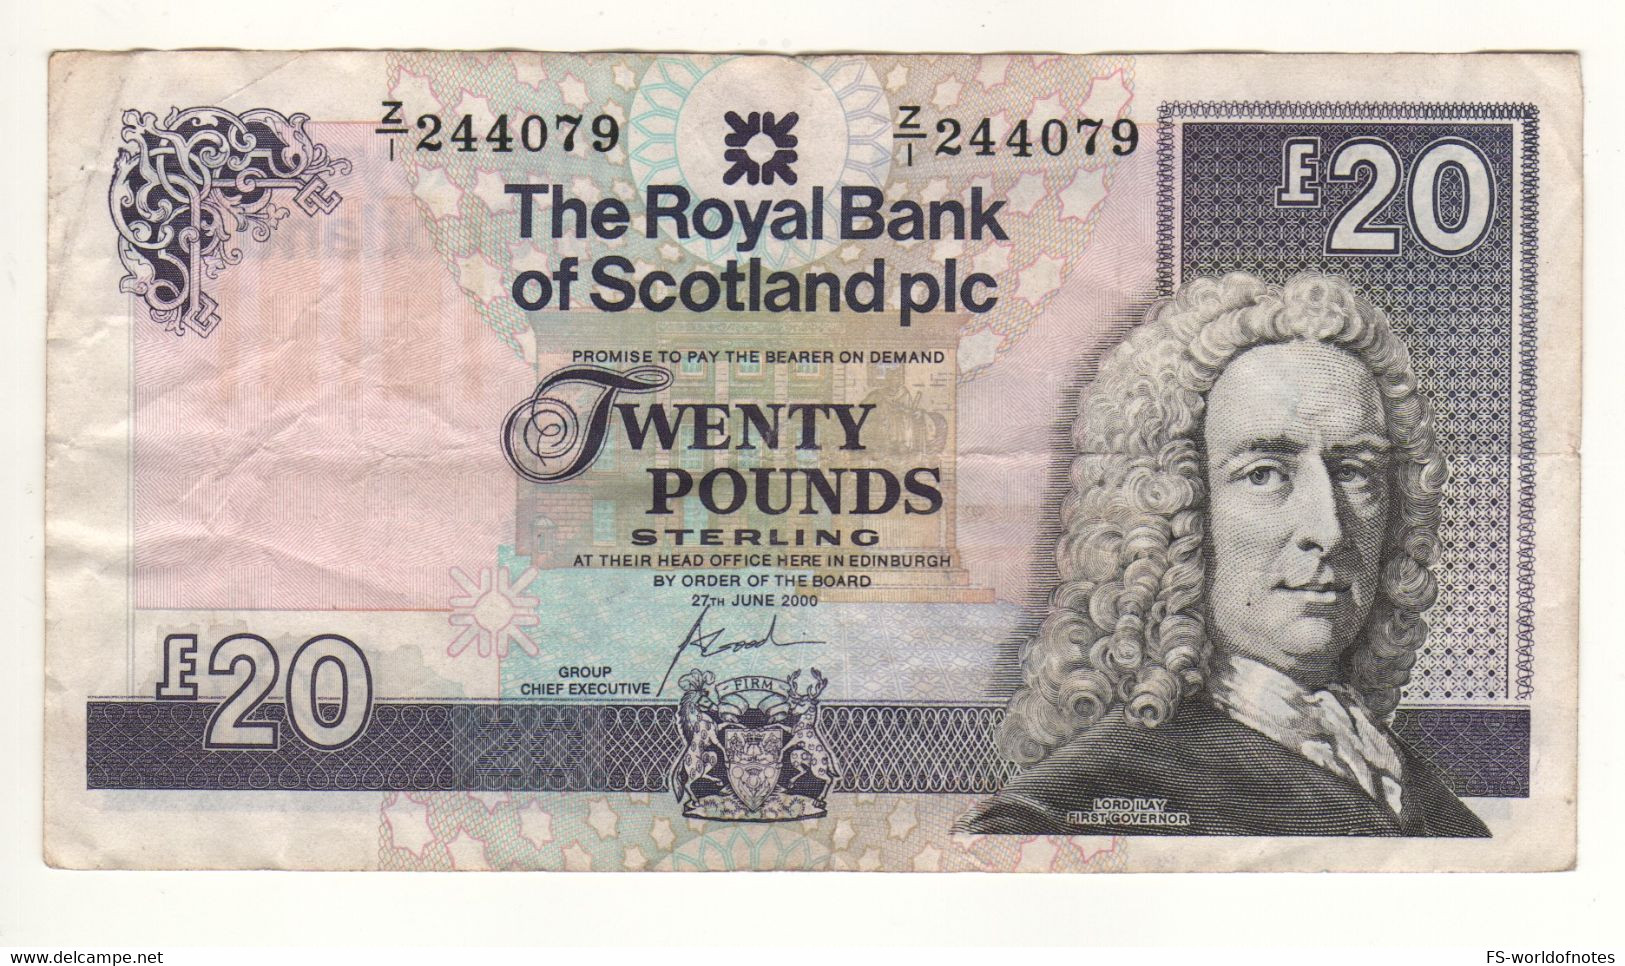 GREAT BRITAIN £20 Pounds 2015 P392c Cleland UK Bank of England aUNC Banknote 